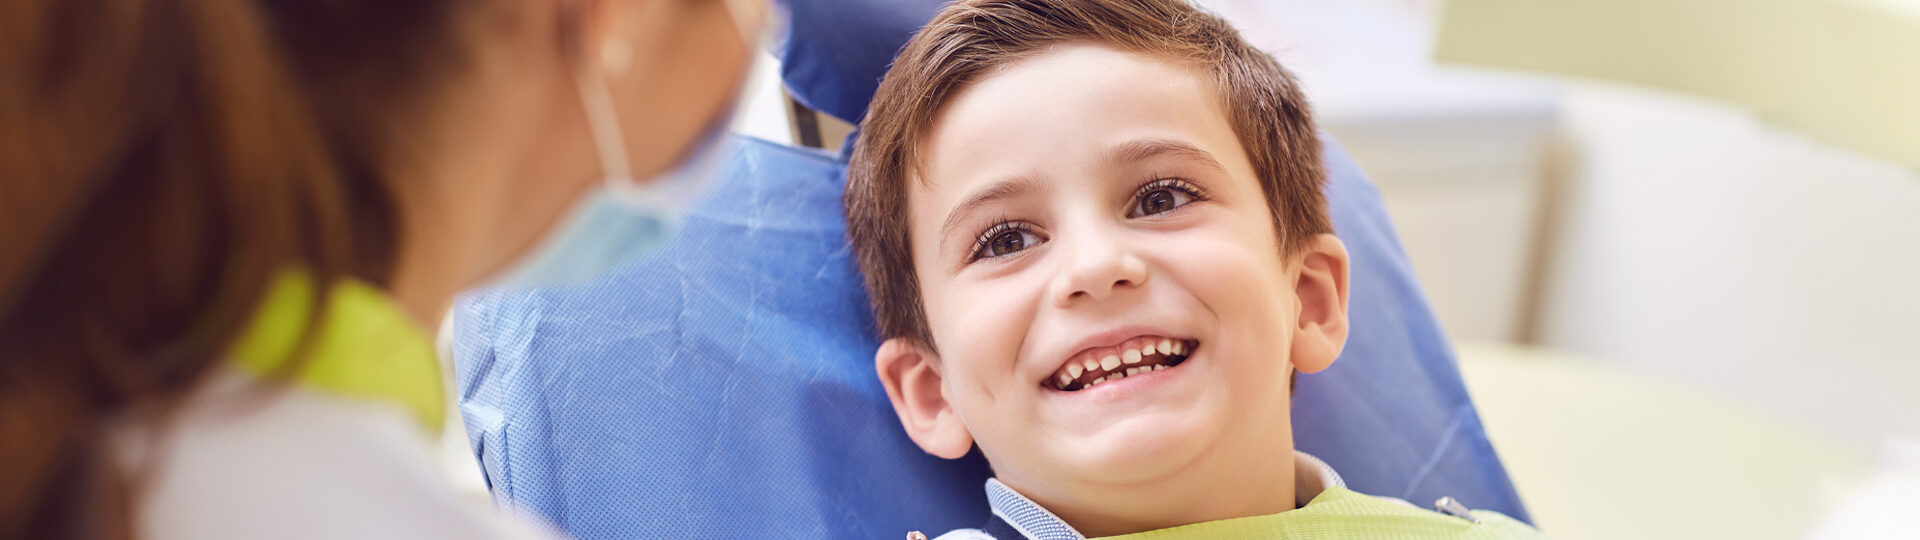 How to Help Your Child Care for Their Teeth